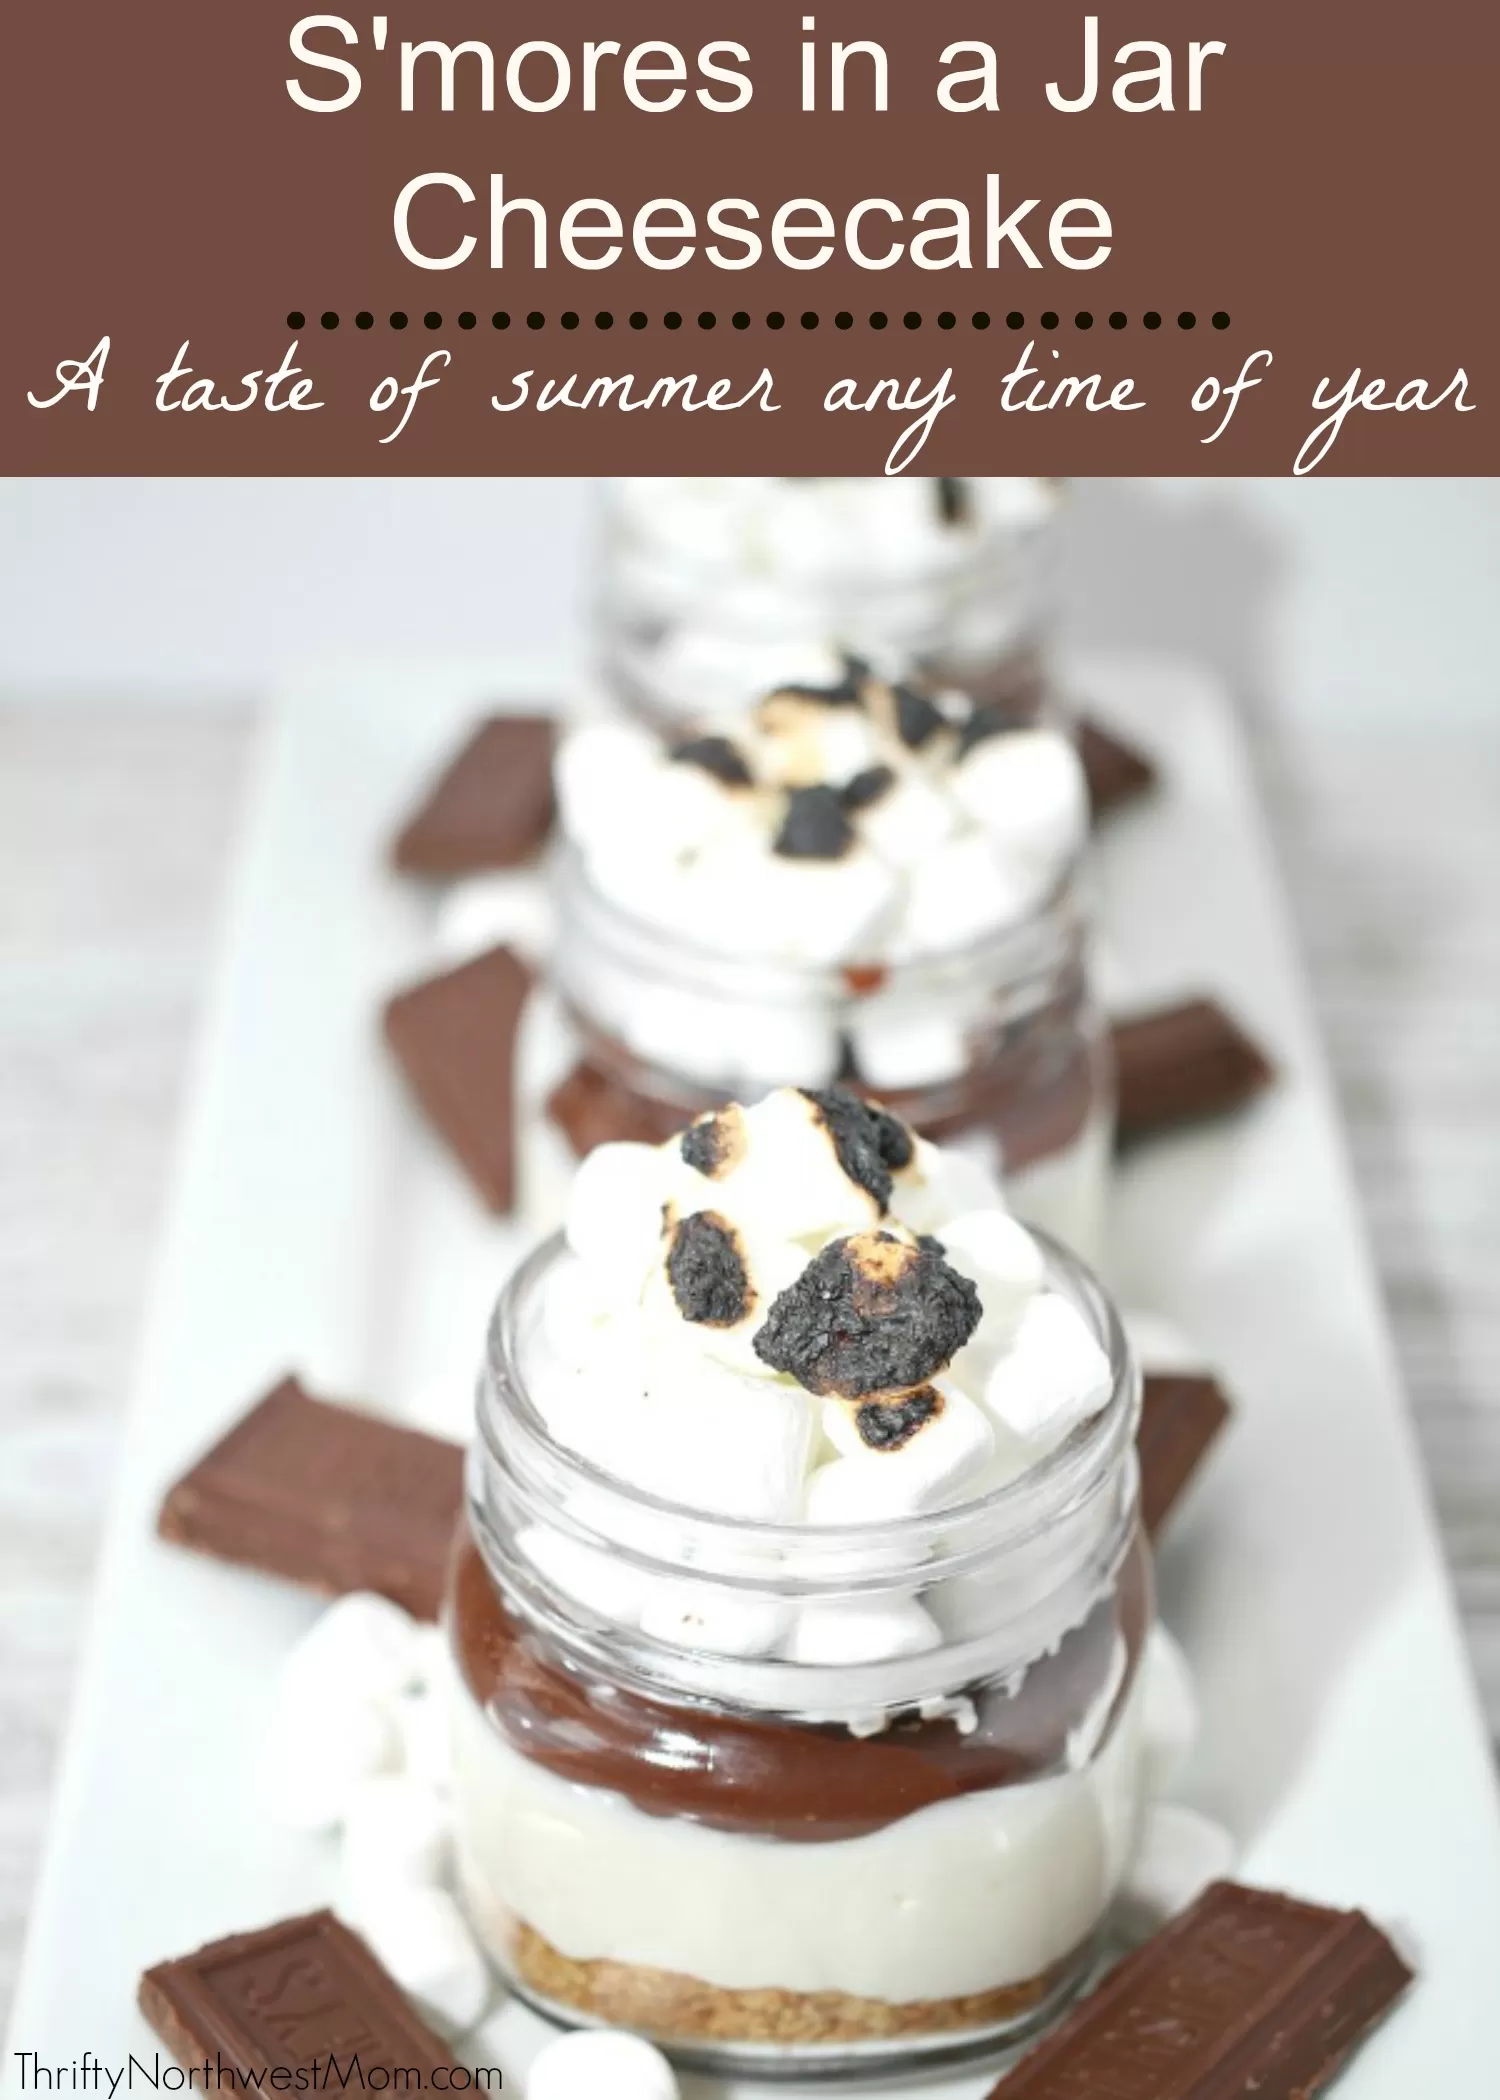 S'mores Cheesecake in a Jar Recipe - A taste of summer all year long with this simple dessert